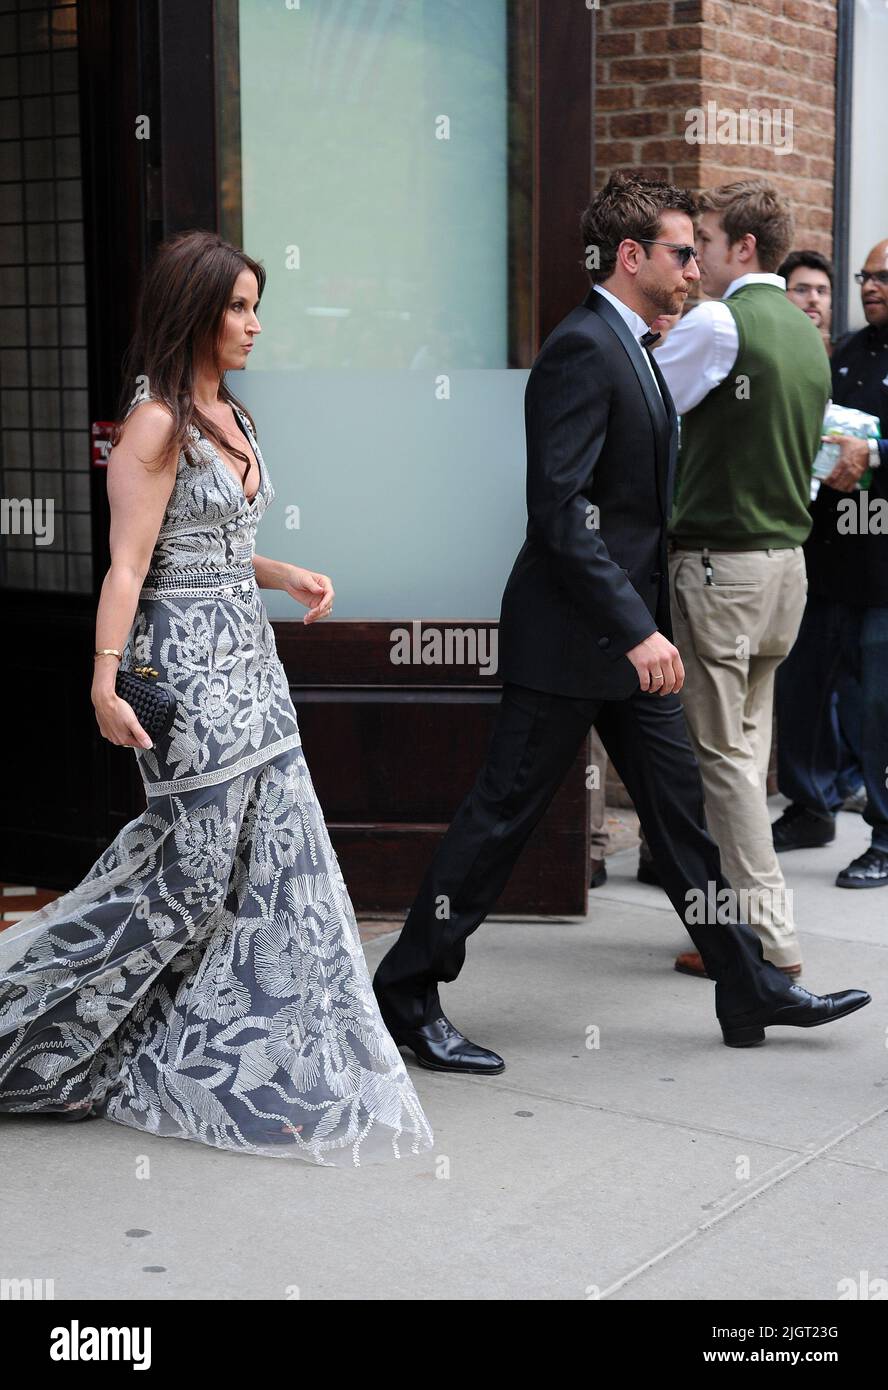 Manhattan, United States Of America. 02nd May, 2011. NEW YORK, NY - MAY 02: Bradley Cooper and Amanda Anka (daughter of singer Paul Anka and wife of Jason Bateman, who was present but not pictured) exit their downtown hotel en route to the Met Costume Gala 2011. on May 2, 2011 in New York City People: Bradley Cooper Amanda Anka Credit: Storms Media Group/Alamy Live News Stock Photo